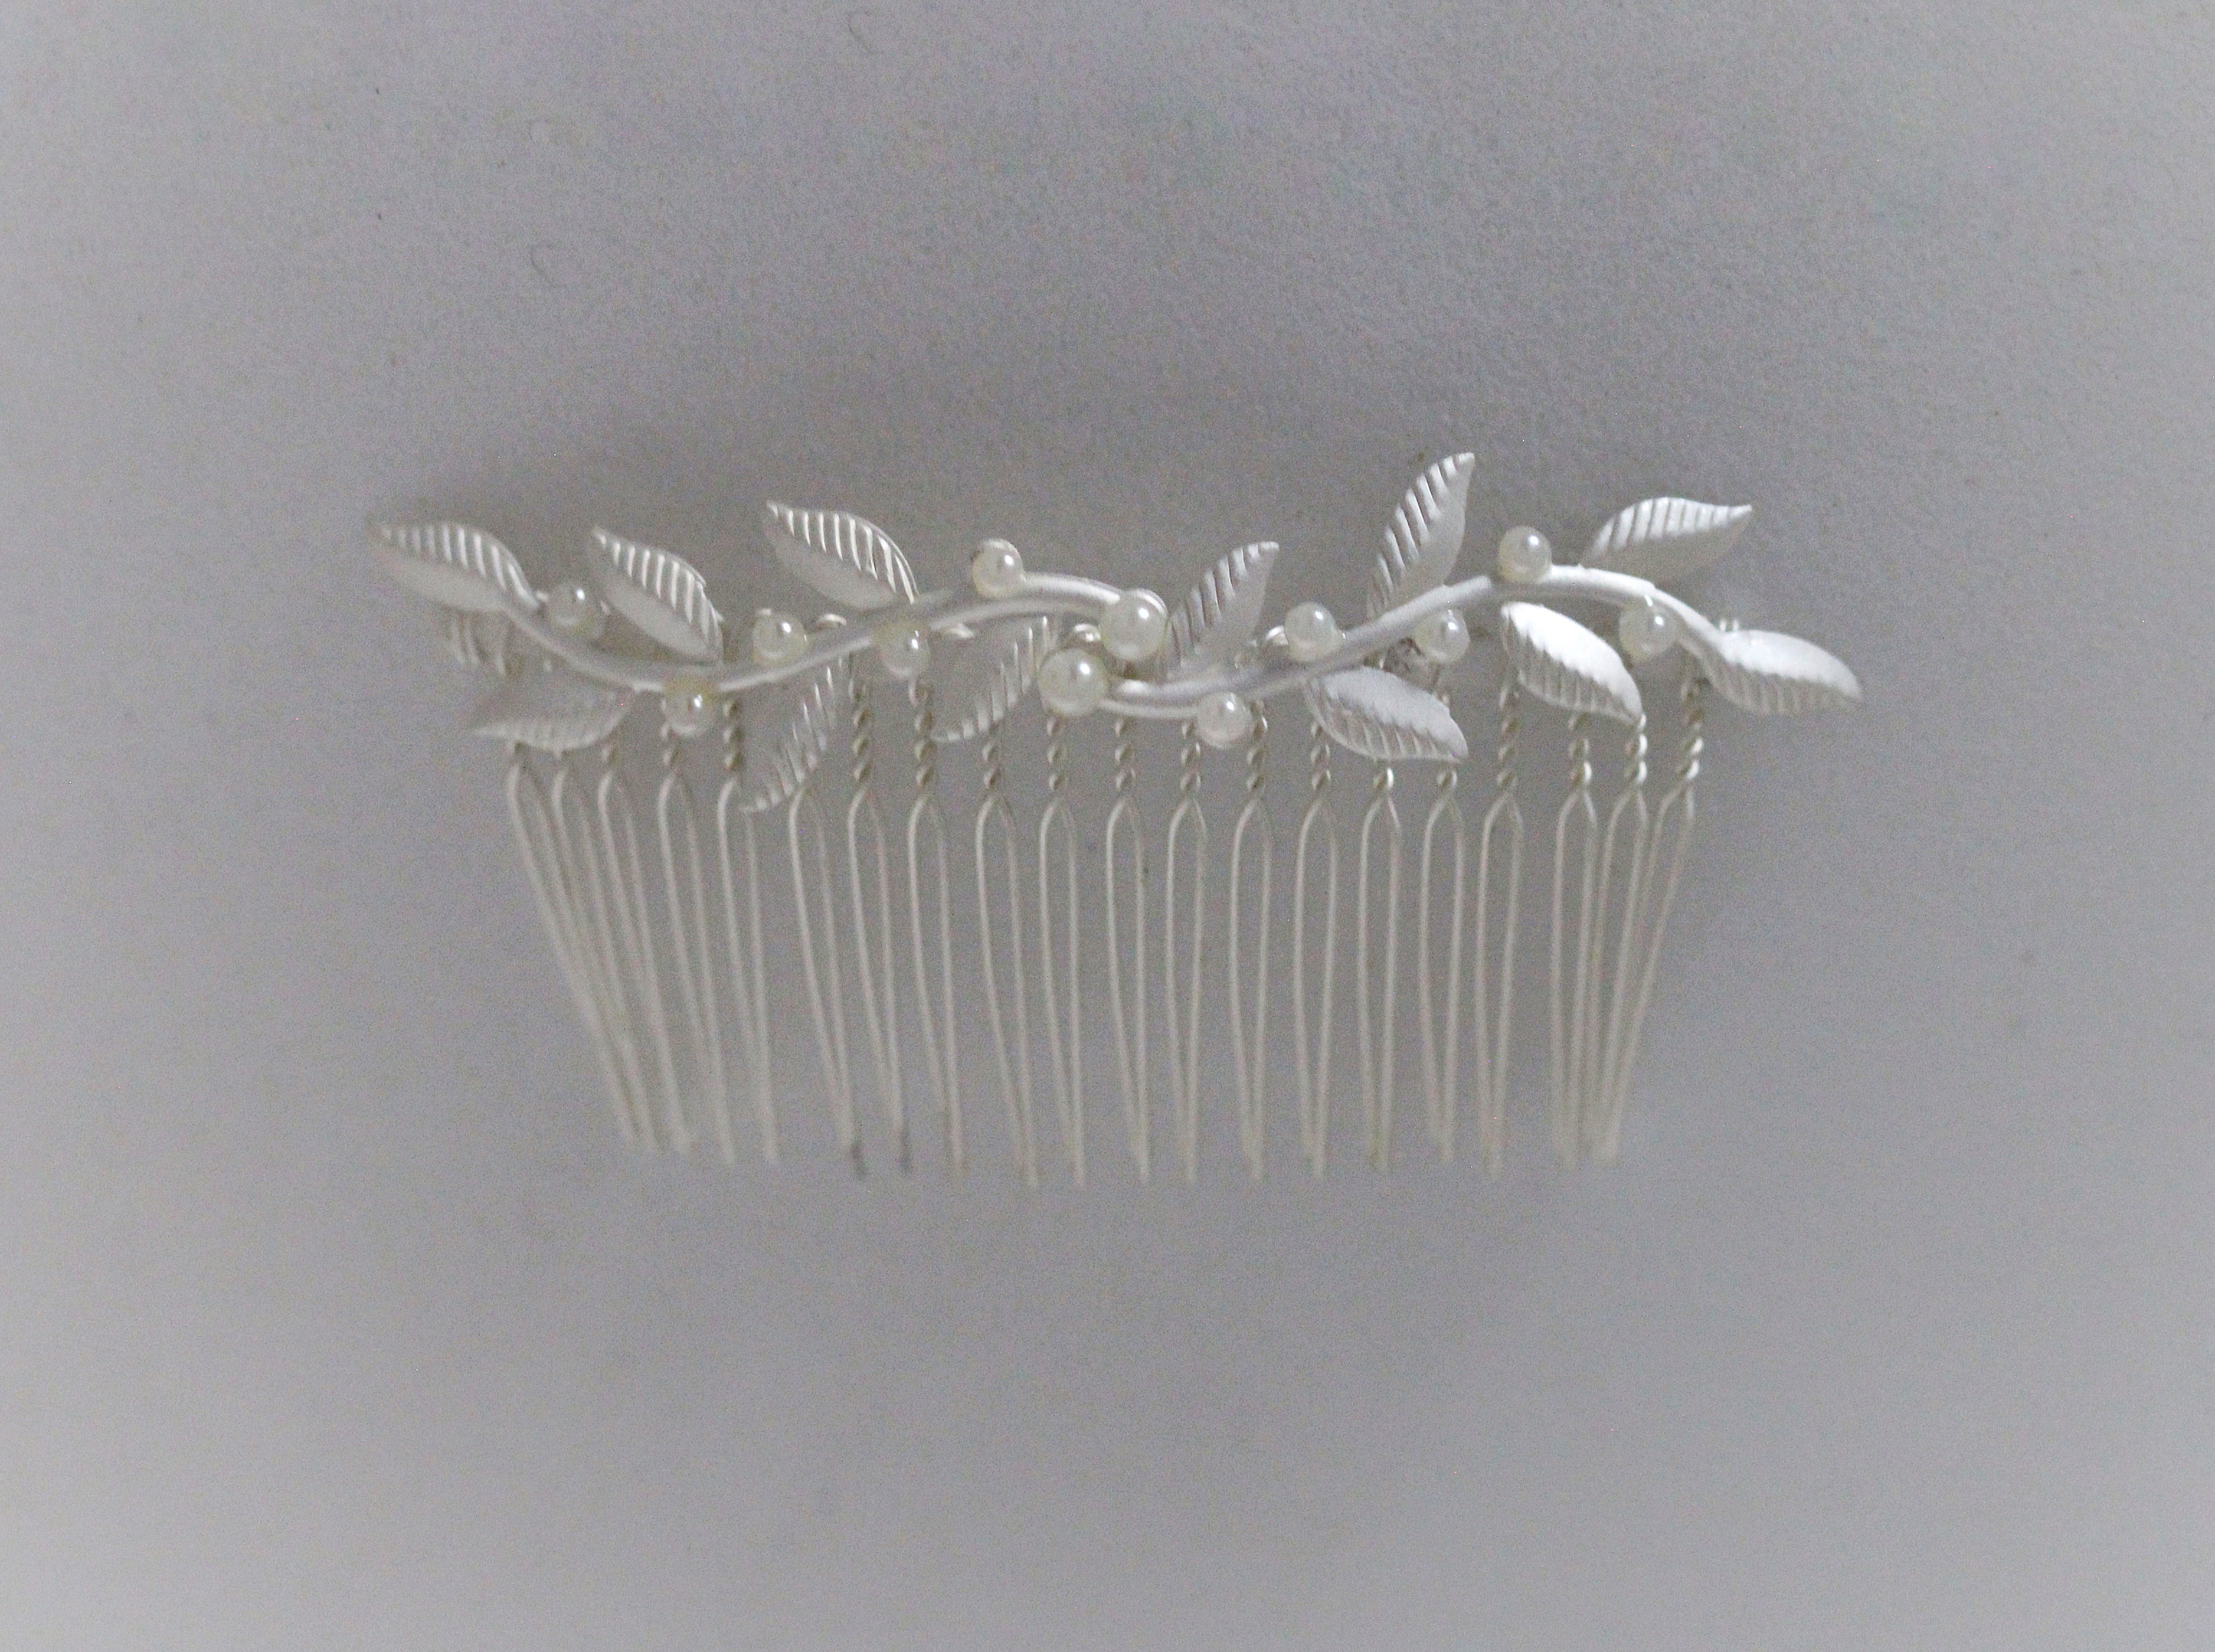 Twigs and Pearls Hair Comb - Discounted Version